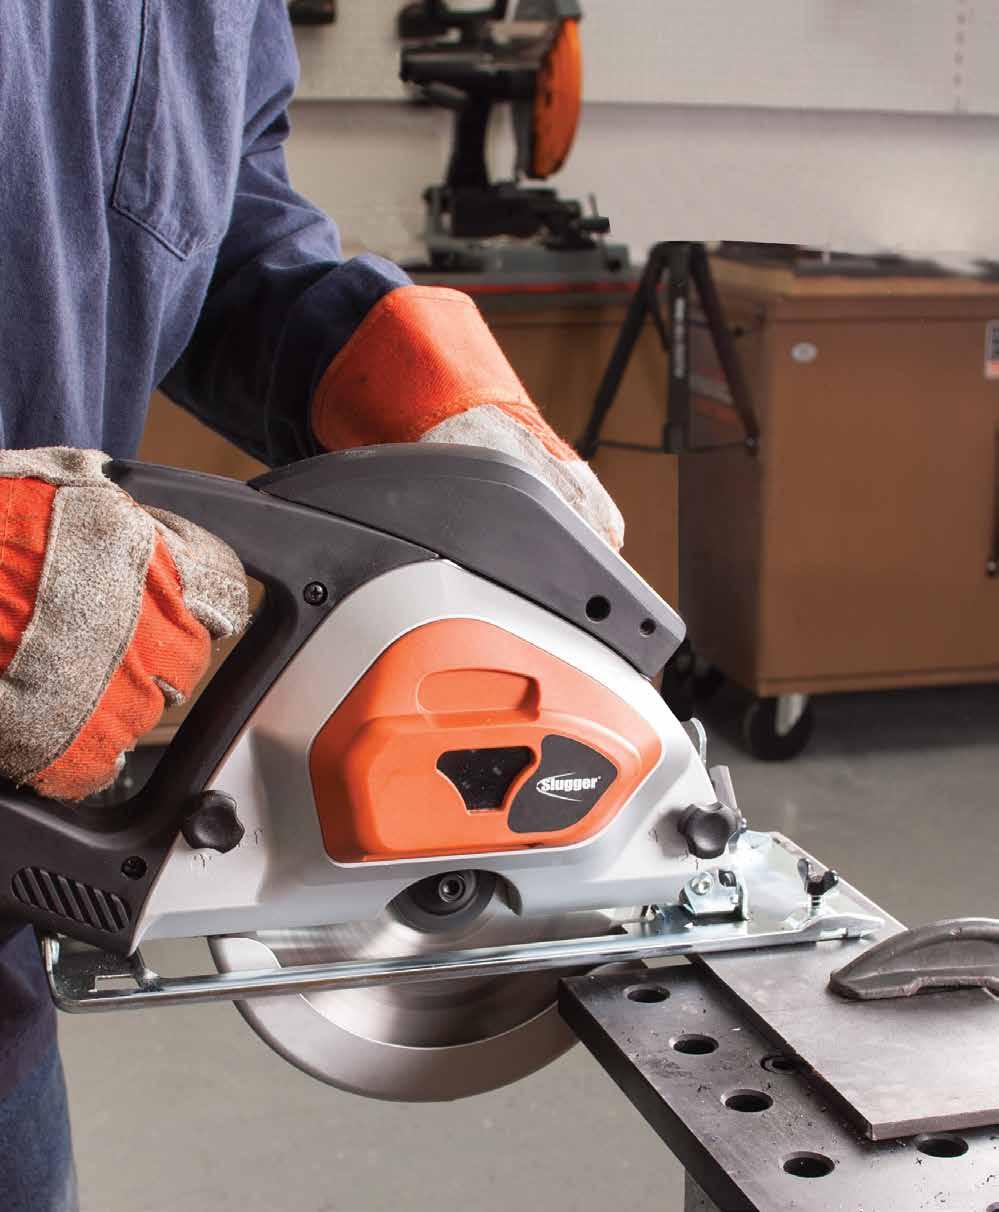 Slugger by FEIN metal cutting saws are built to stand up to whatever you can throw at them.